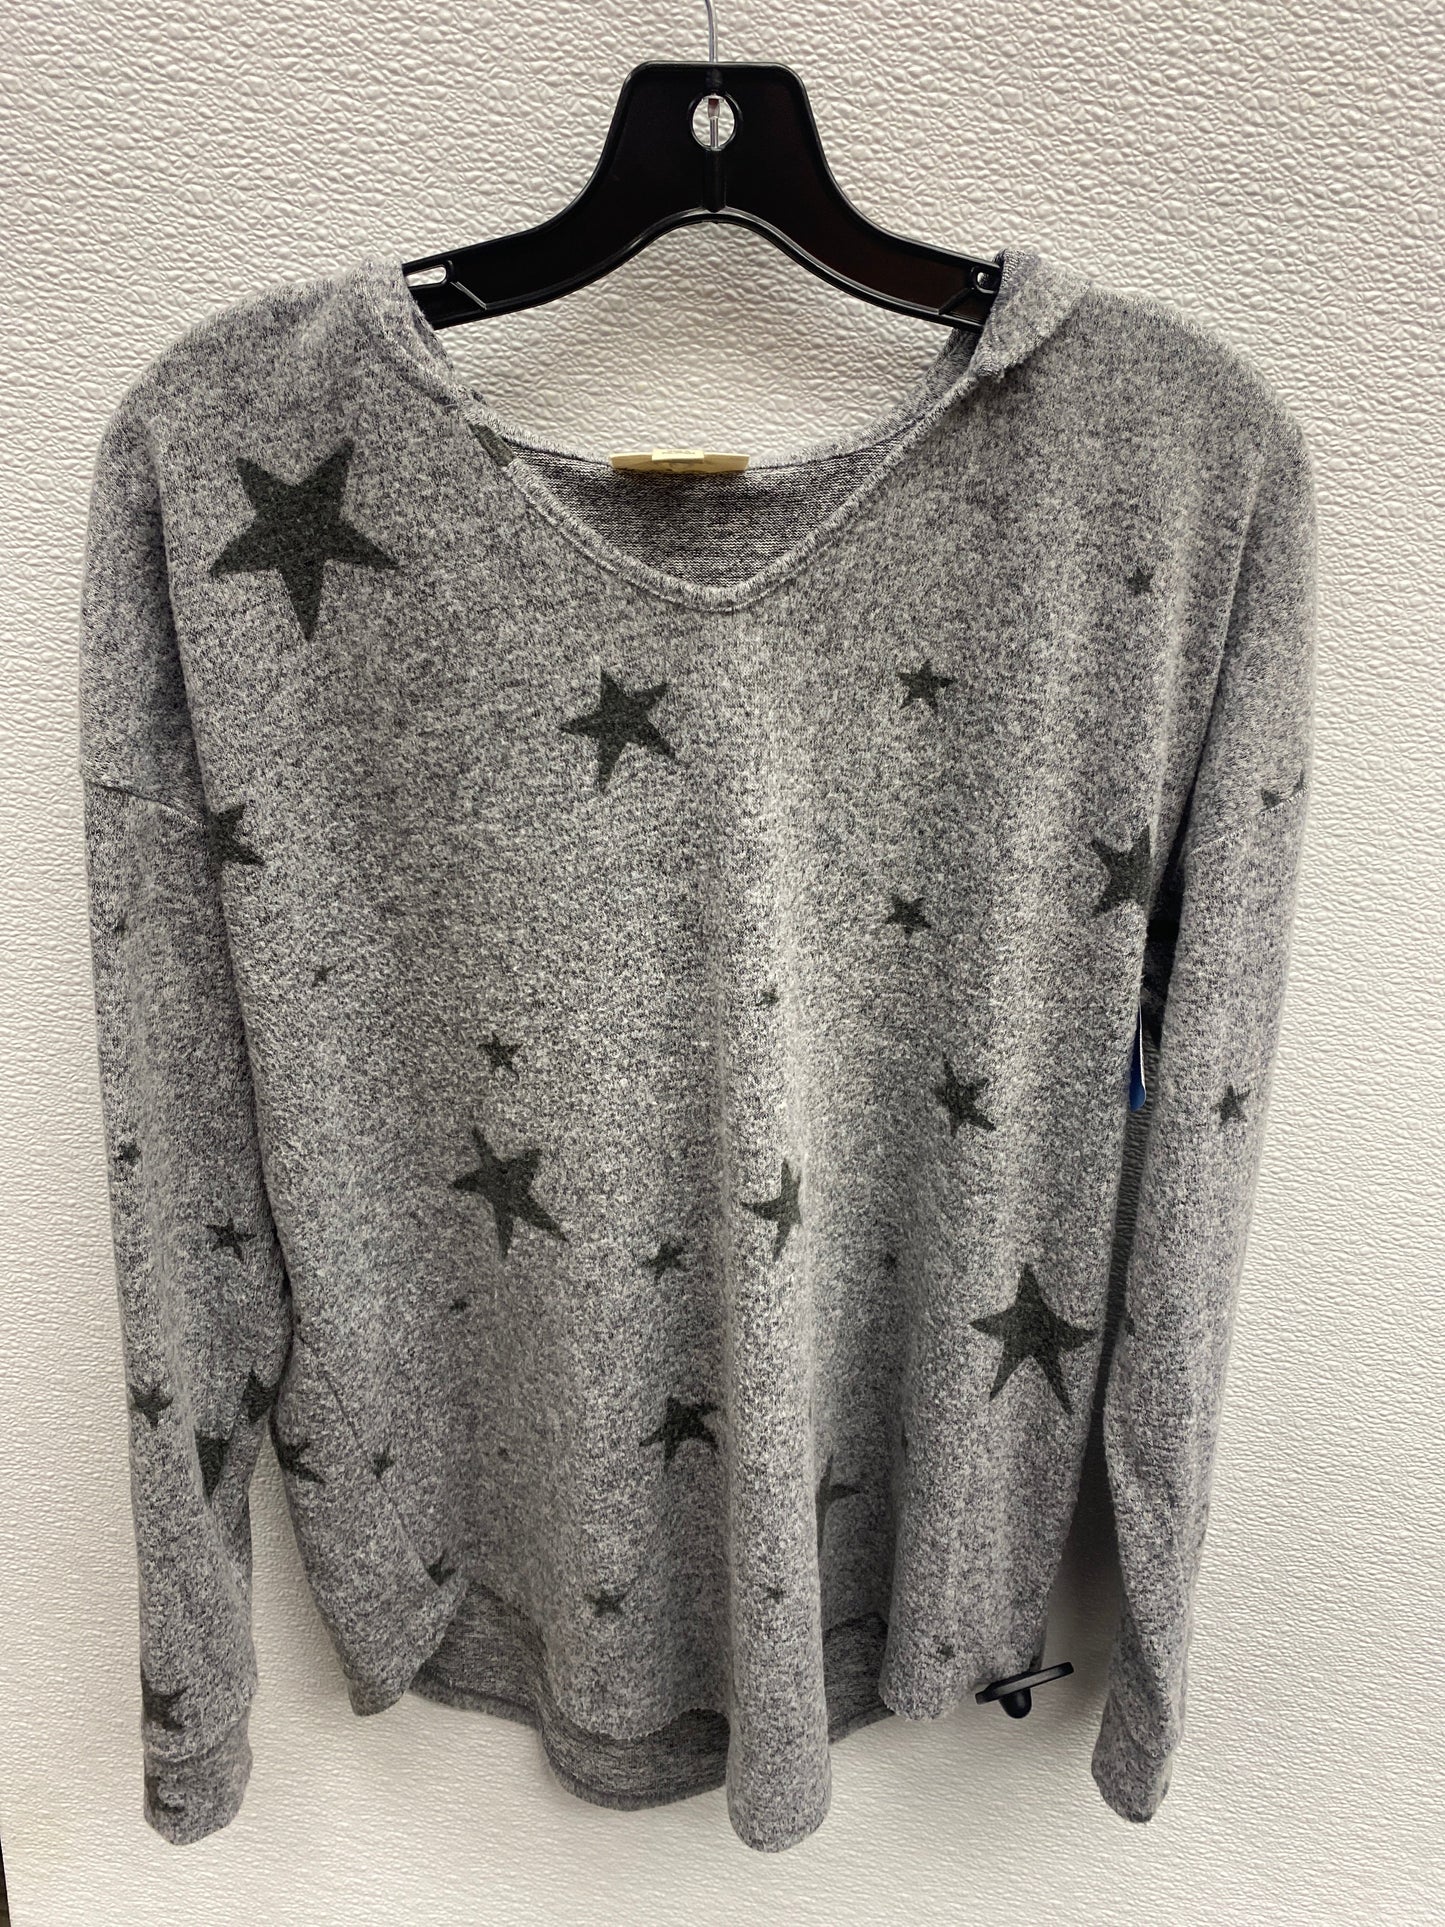 Top Long Sleeve Fleece Pullover By Style And Company  Size: M